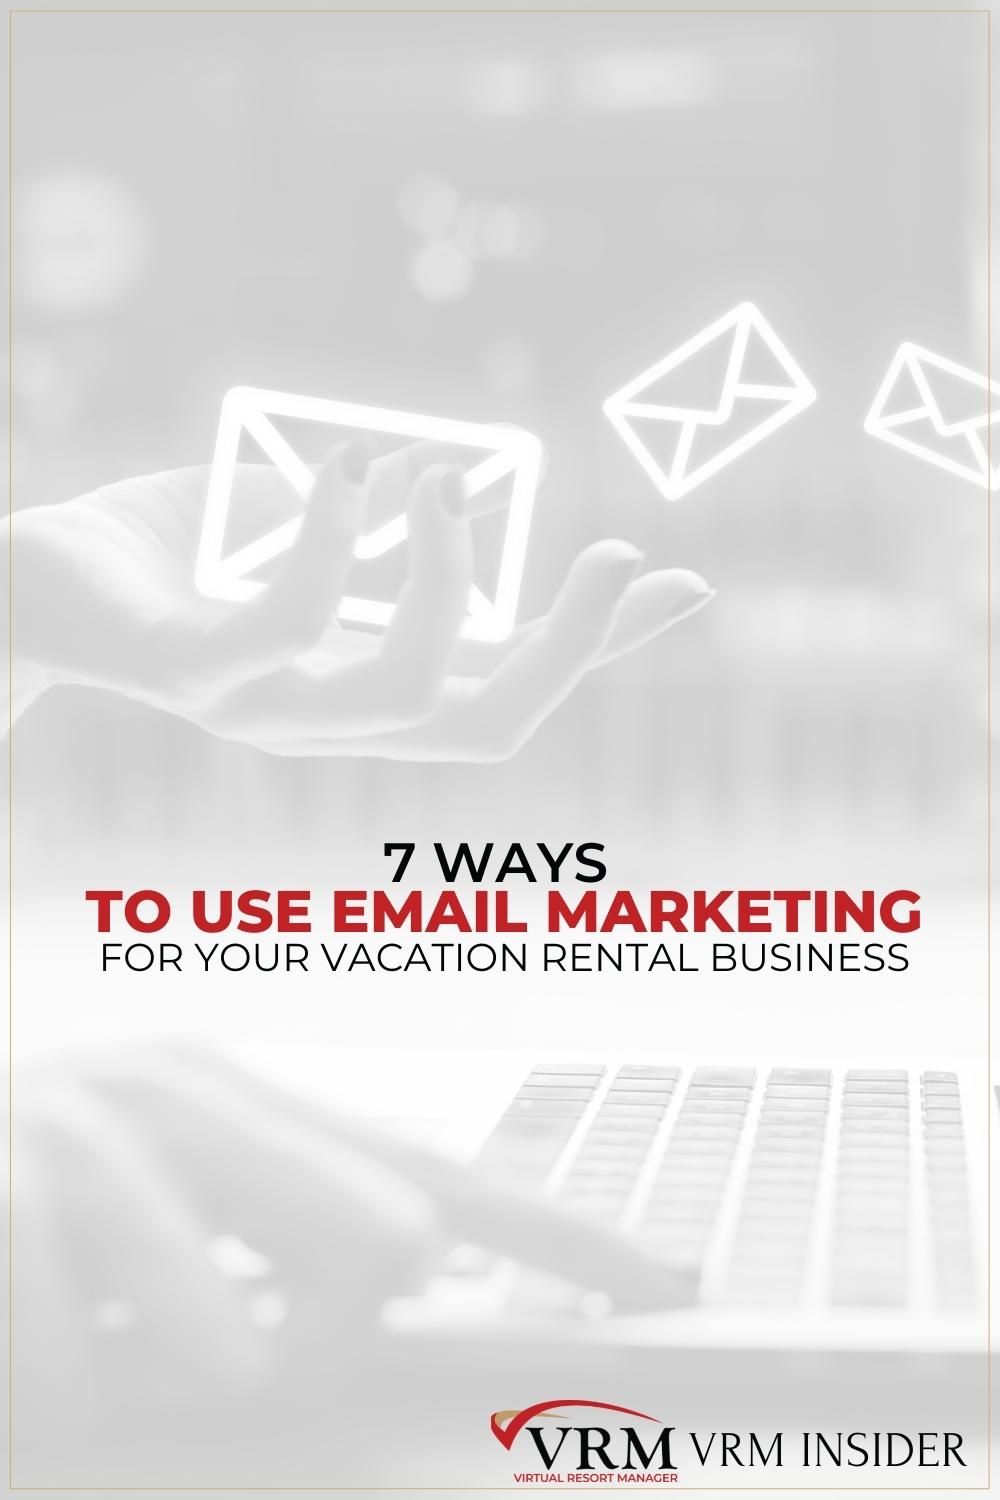 VRM Insider, 7 Ways to Use Email Marketing for Your Vacation Rental Business